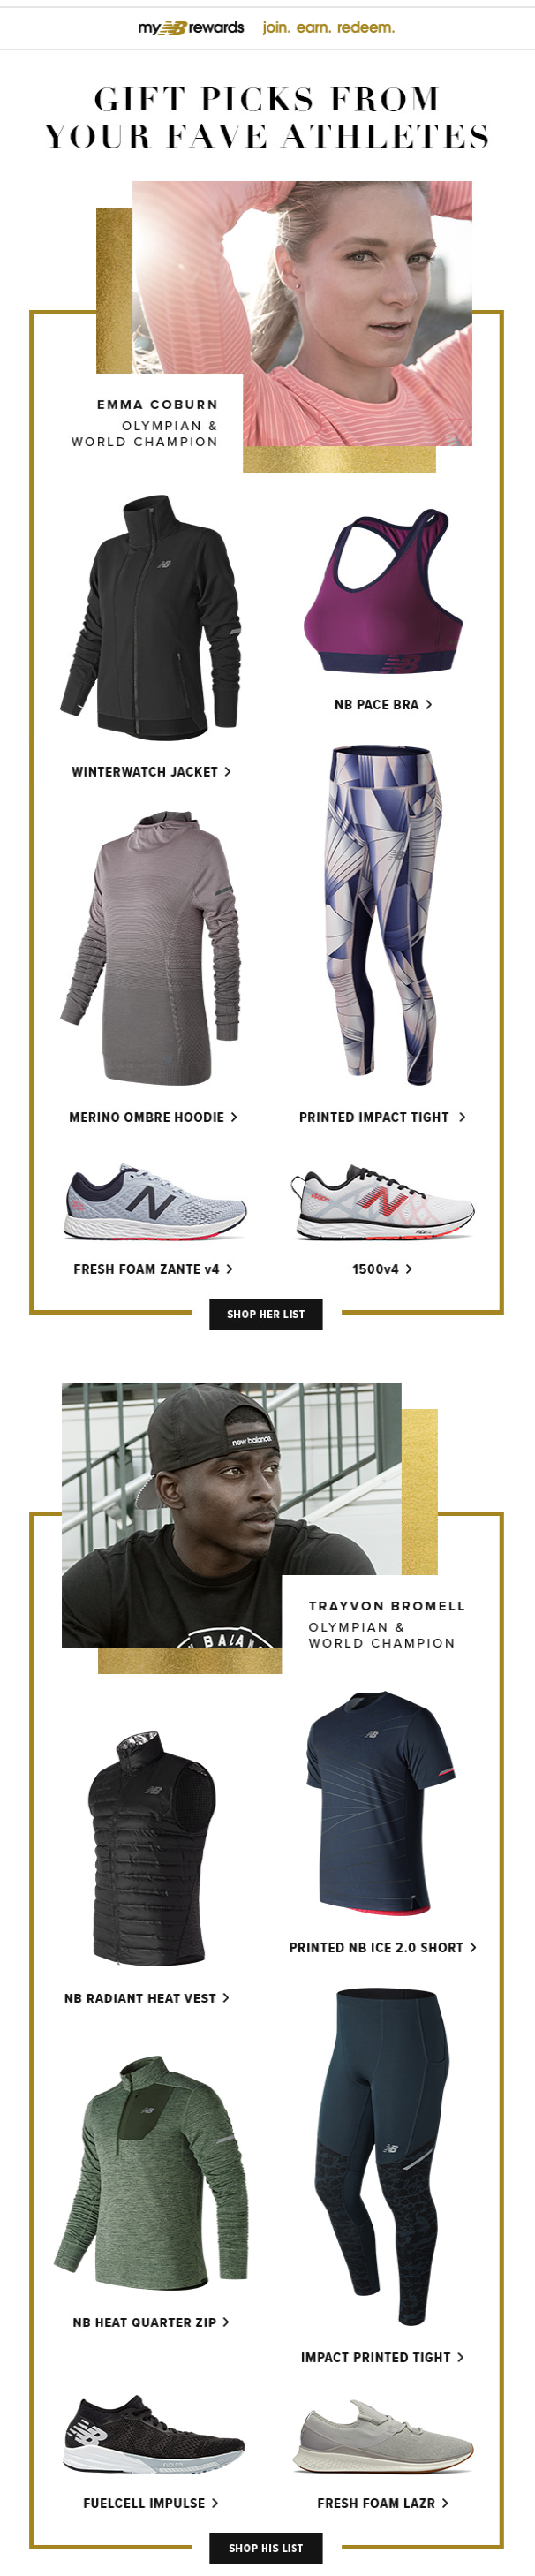 Famous athletes mentioned as social proof in sportswear brand email